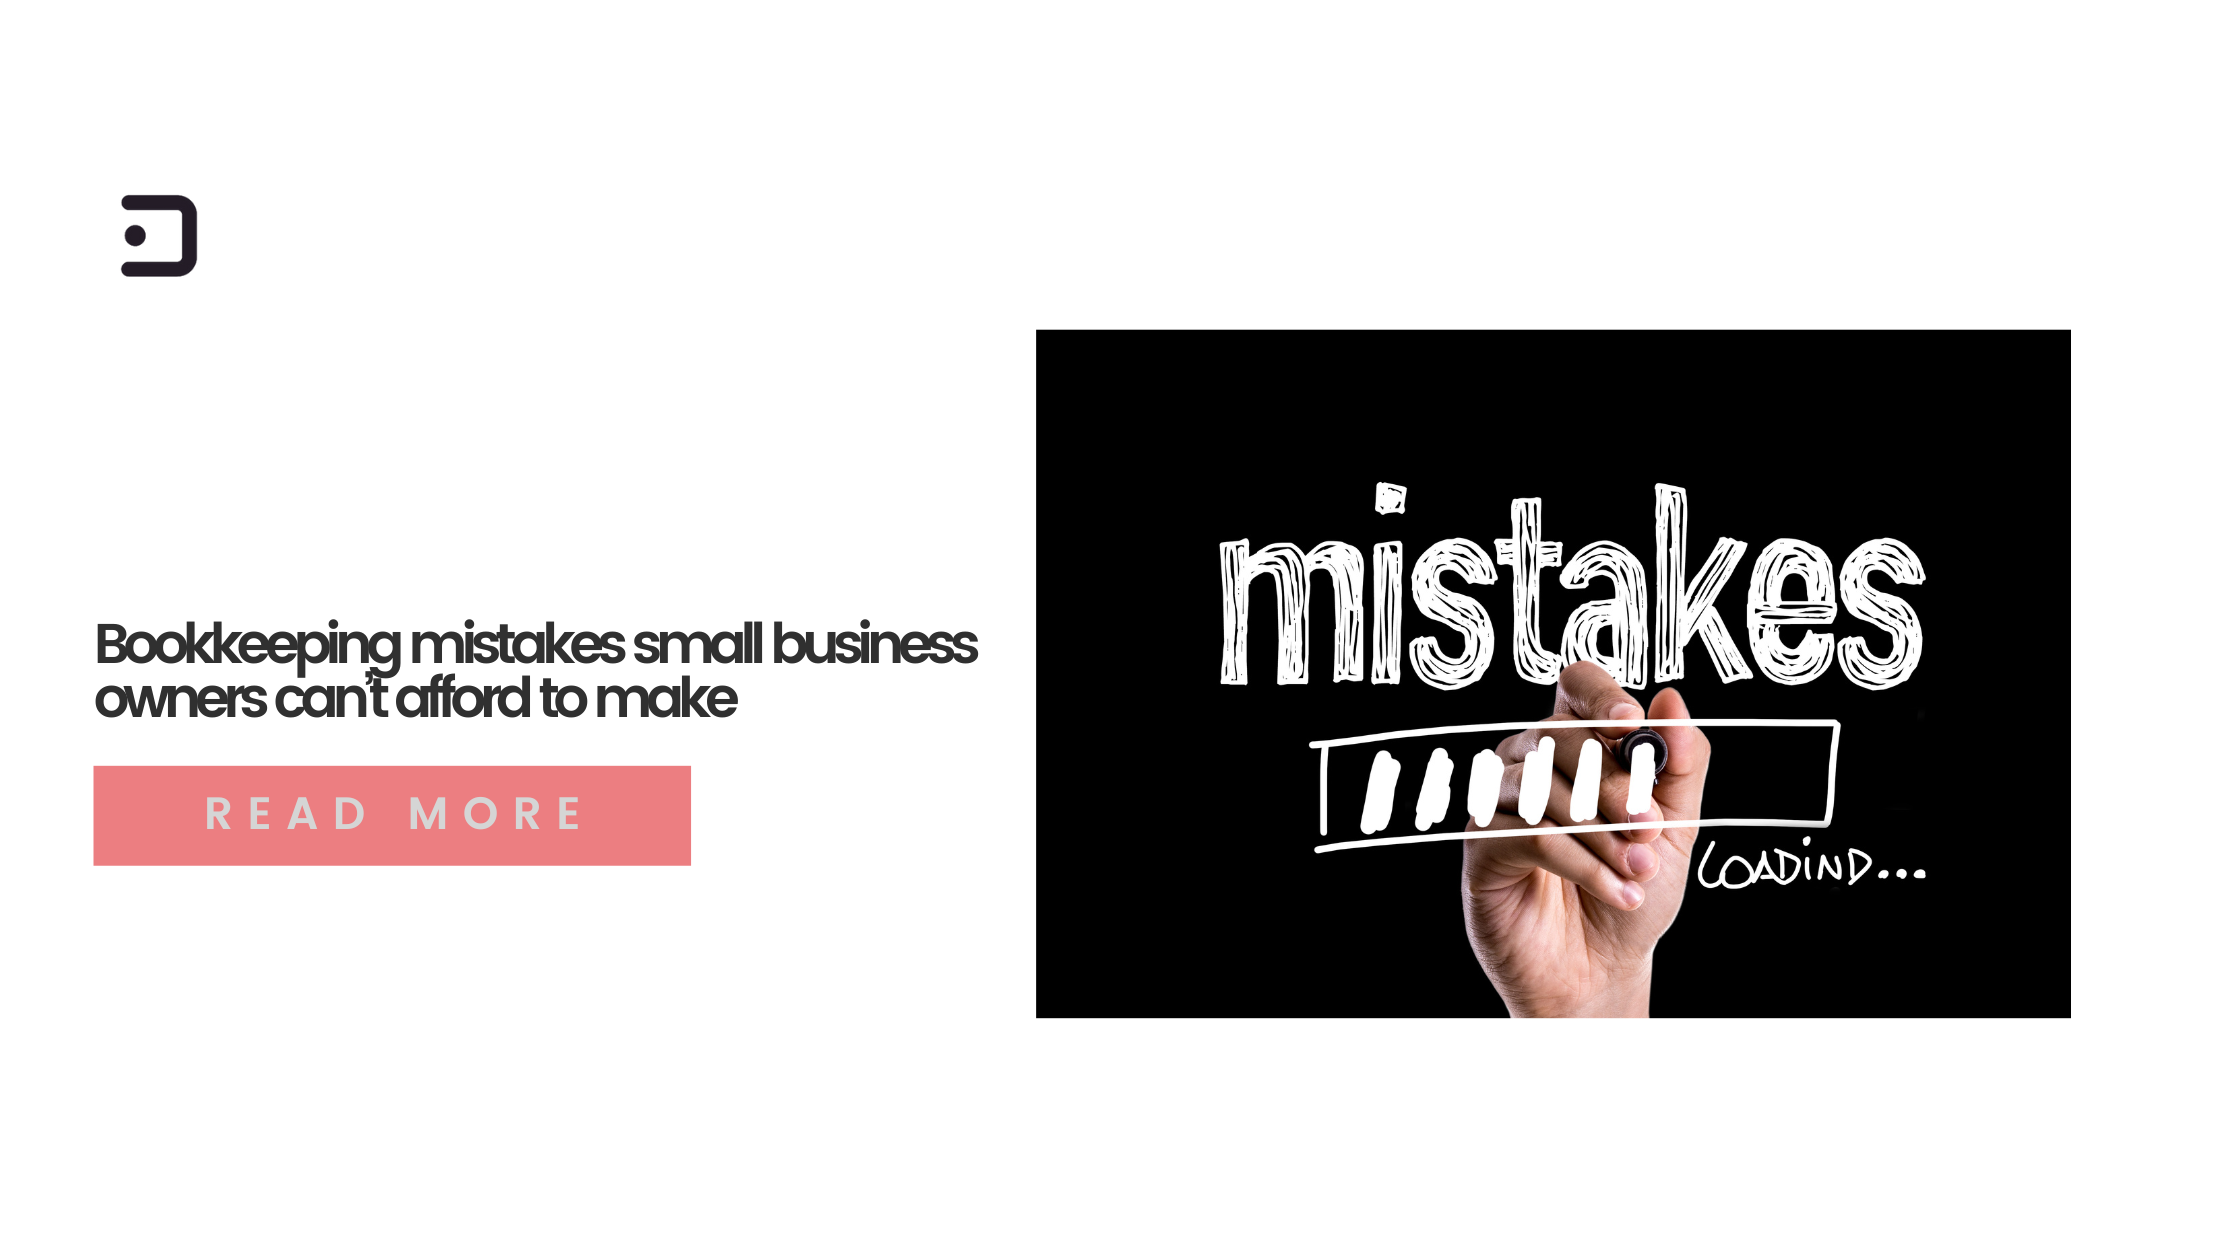 Fatal bookkeeping mistakes small business owners can’t afford to make - Dukka